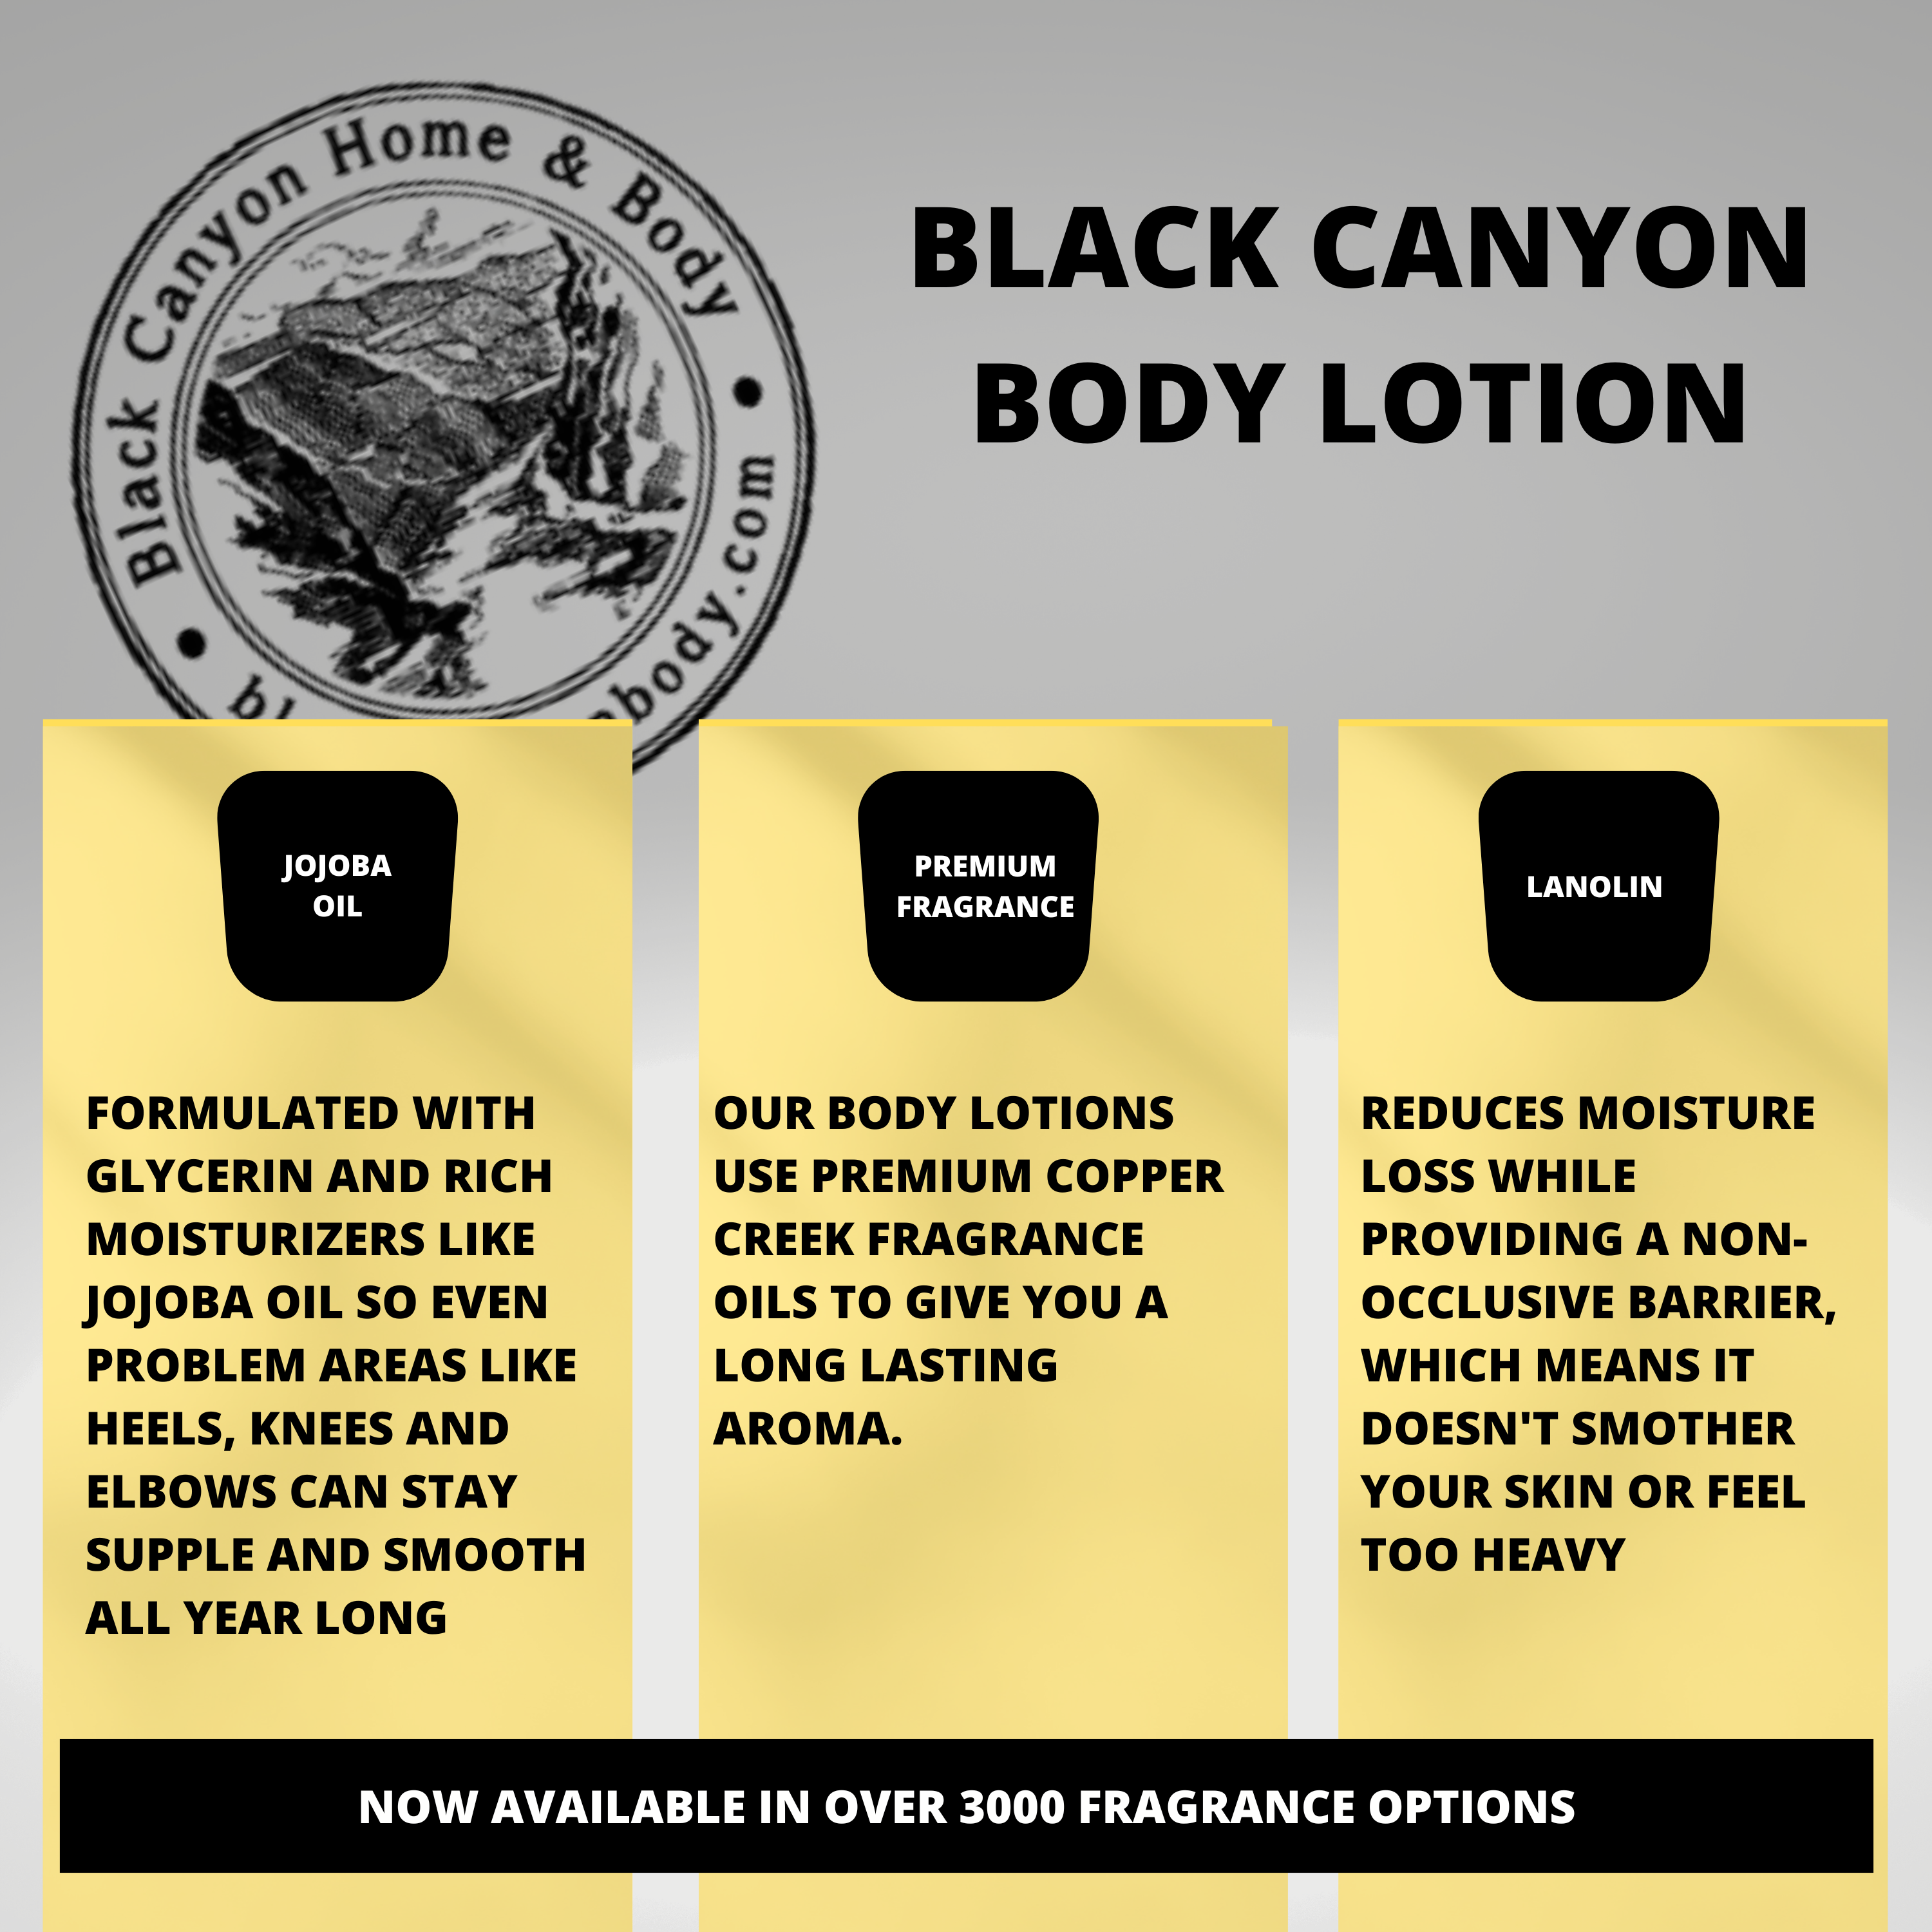 Black Canyon Caramel Pecan Surprise Scented Luxury Body Lotion with Lanolin and Jojoba Oil